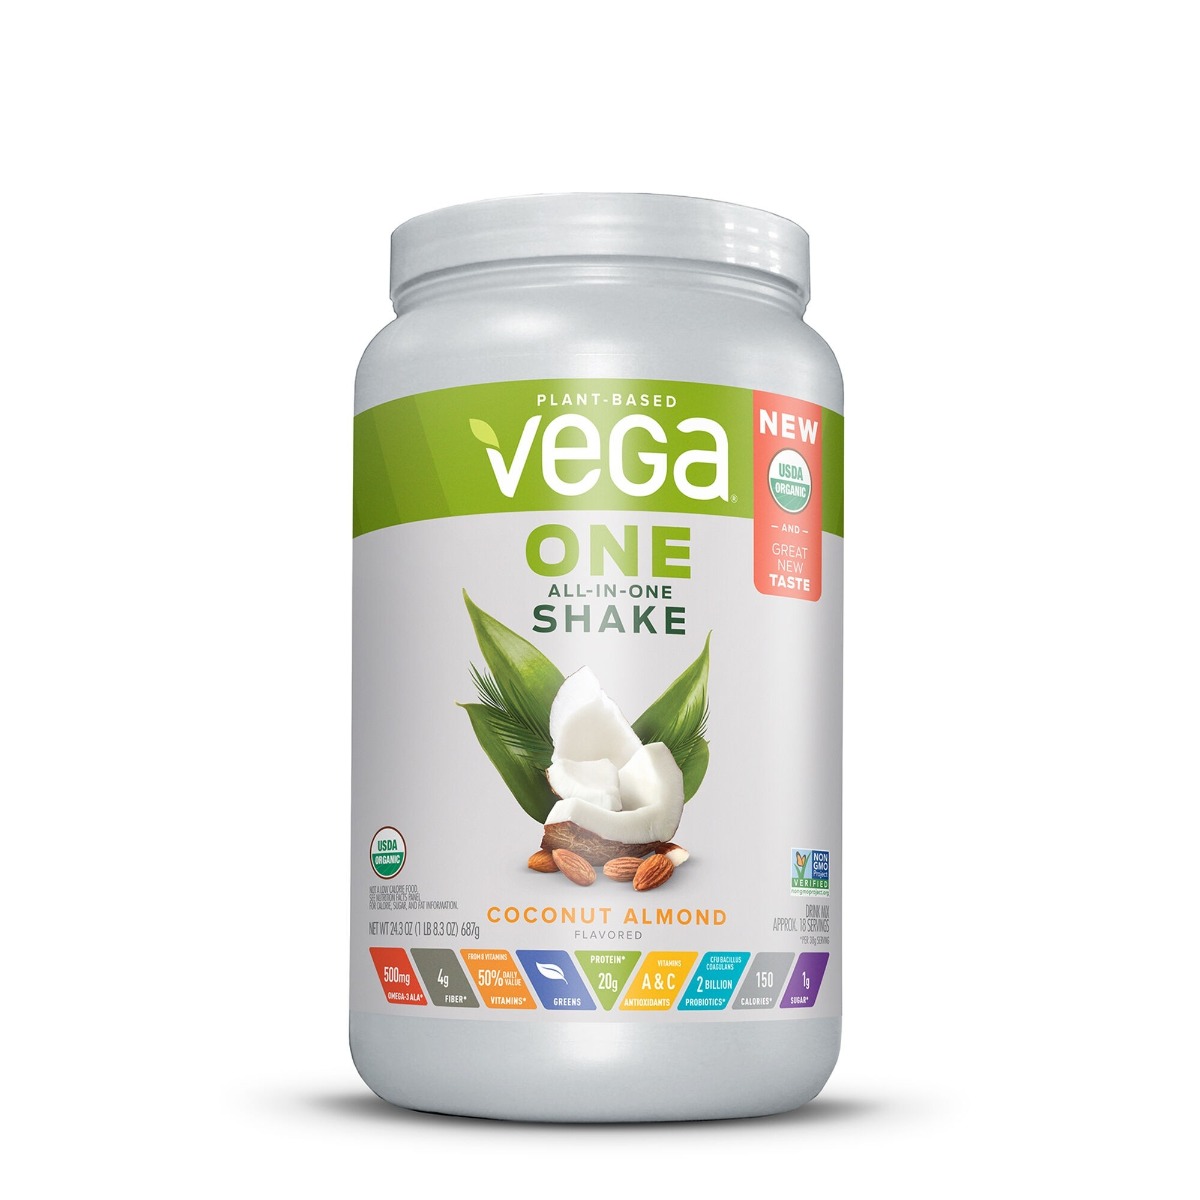 Proteina vegetala cu aroma de cocos si migdale One All-In-One Nutritional Shake, 687g, Vega